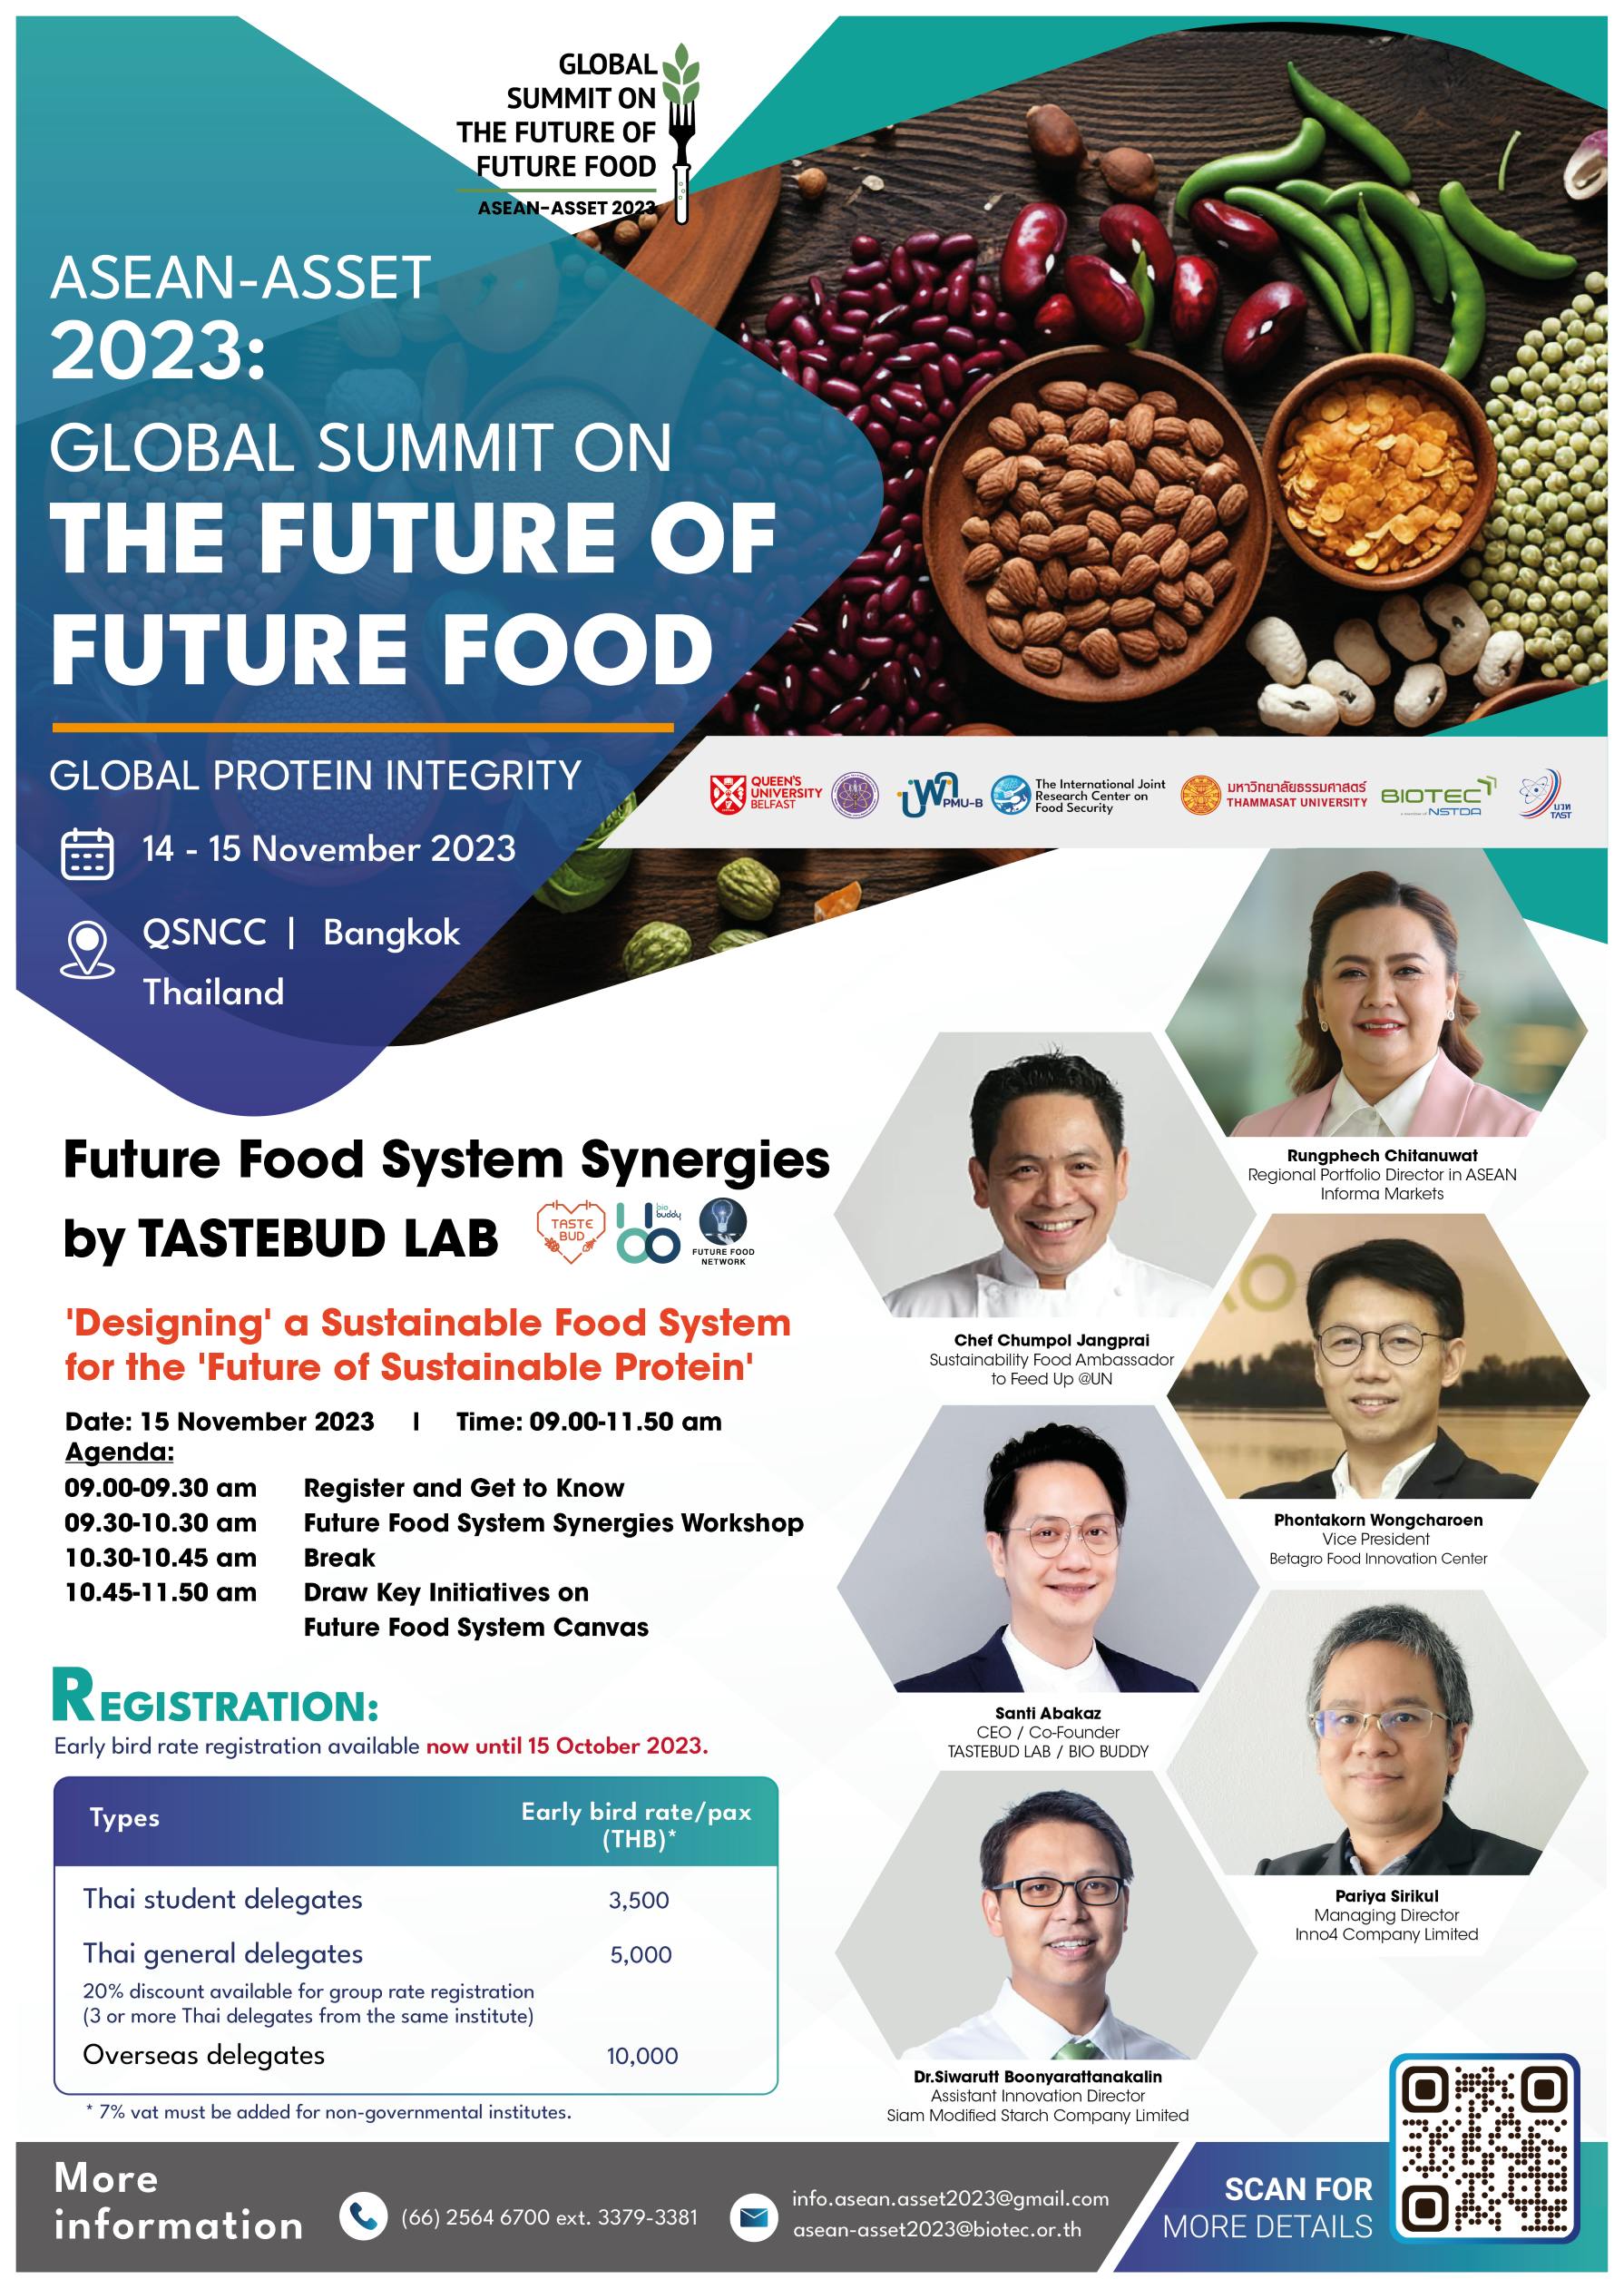 International Conference on ASEAN-ASSET2023: Global Summit on the Future of Future Food "Global Protein Integrity"